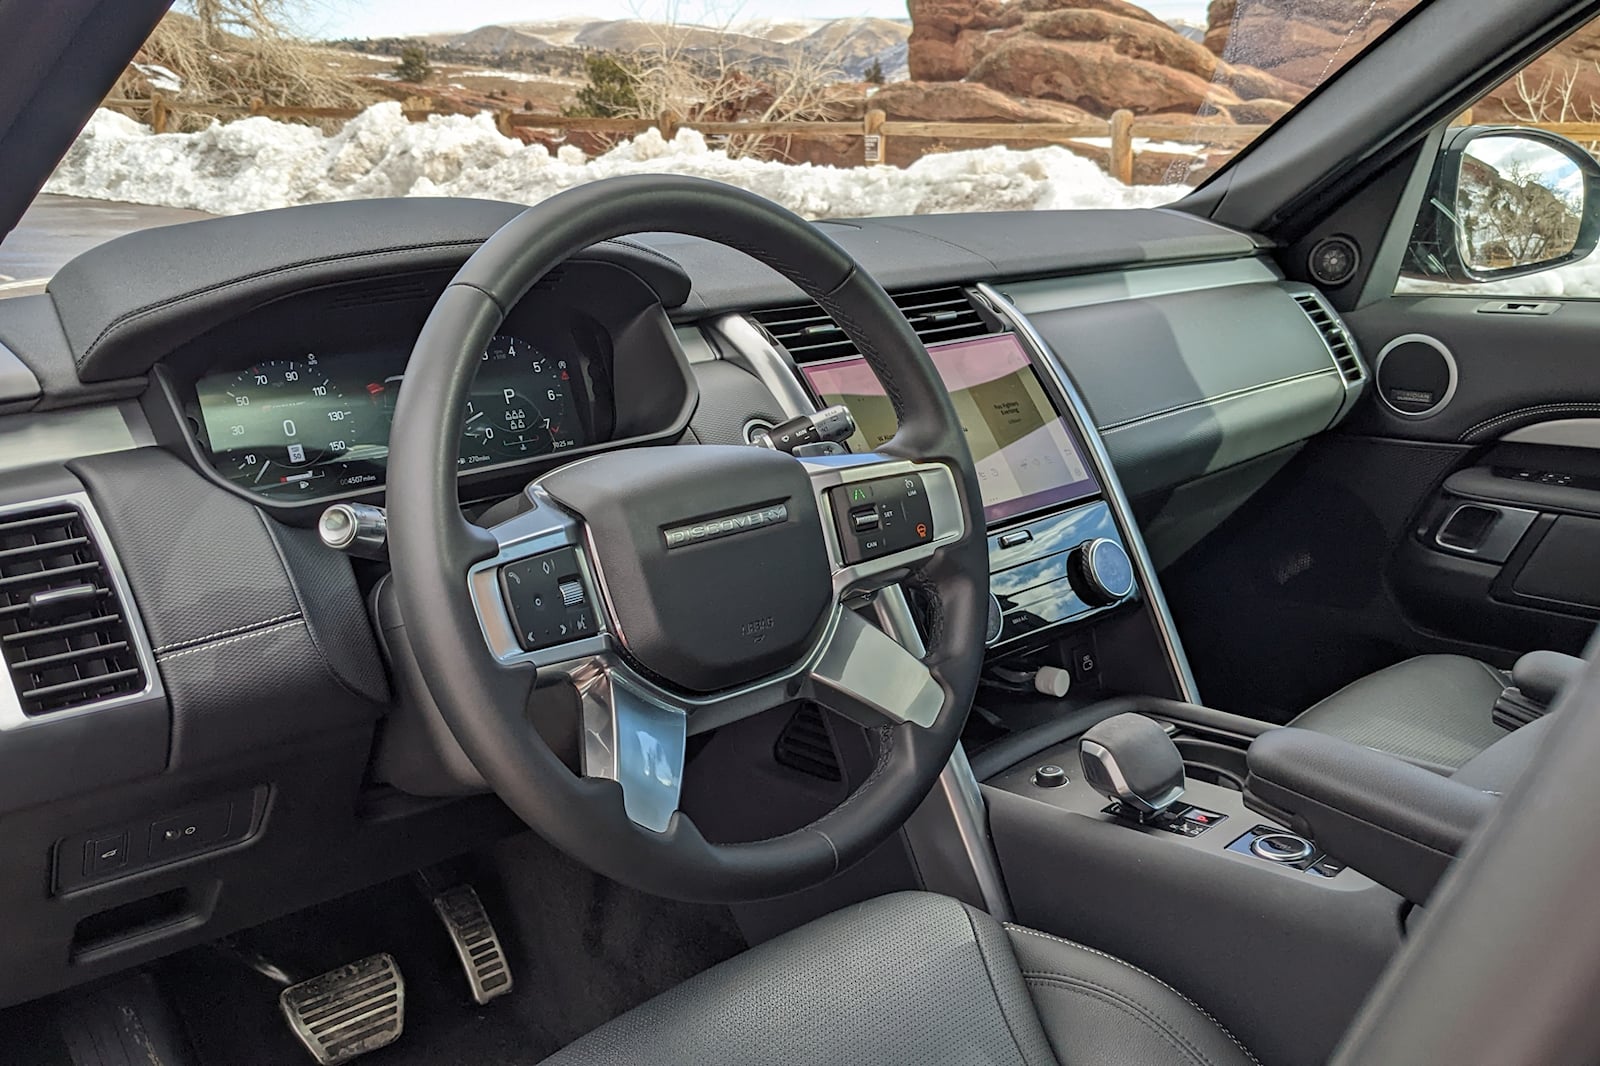 2021 Land Rover Discovery Dashboard